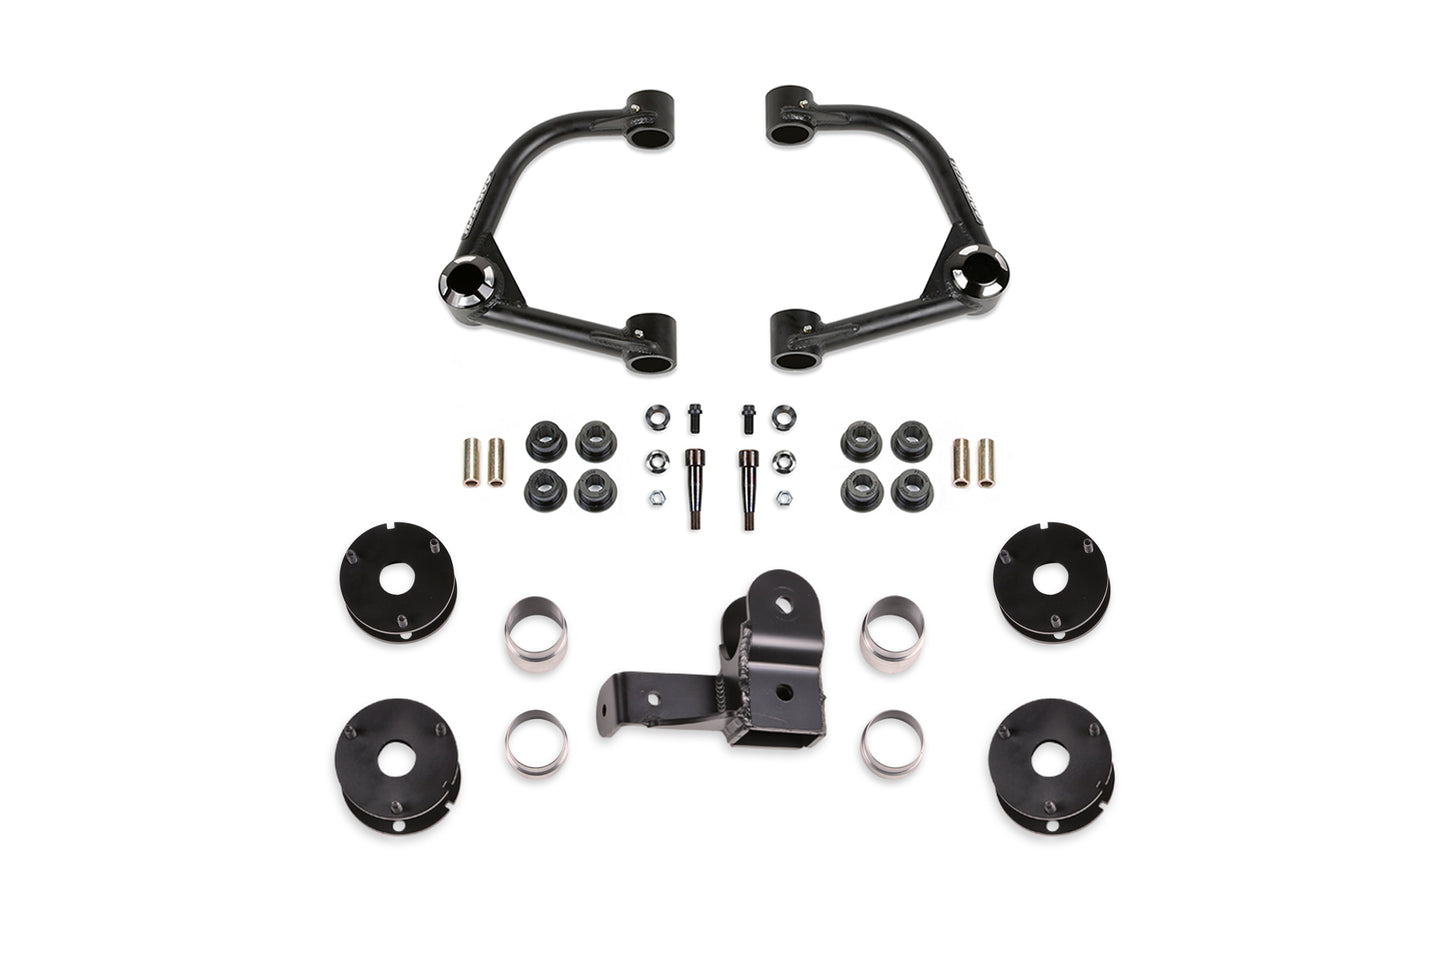 Fabtech - 4″ UNIBALL UCA LIFT KIT – FRONT SHOCK SPACERS & REAR SHOCK SPACERS